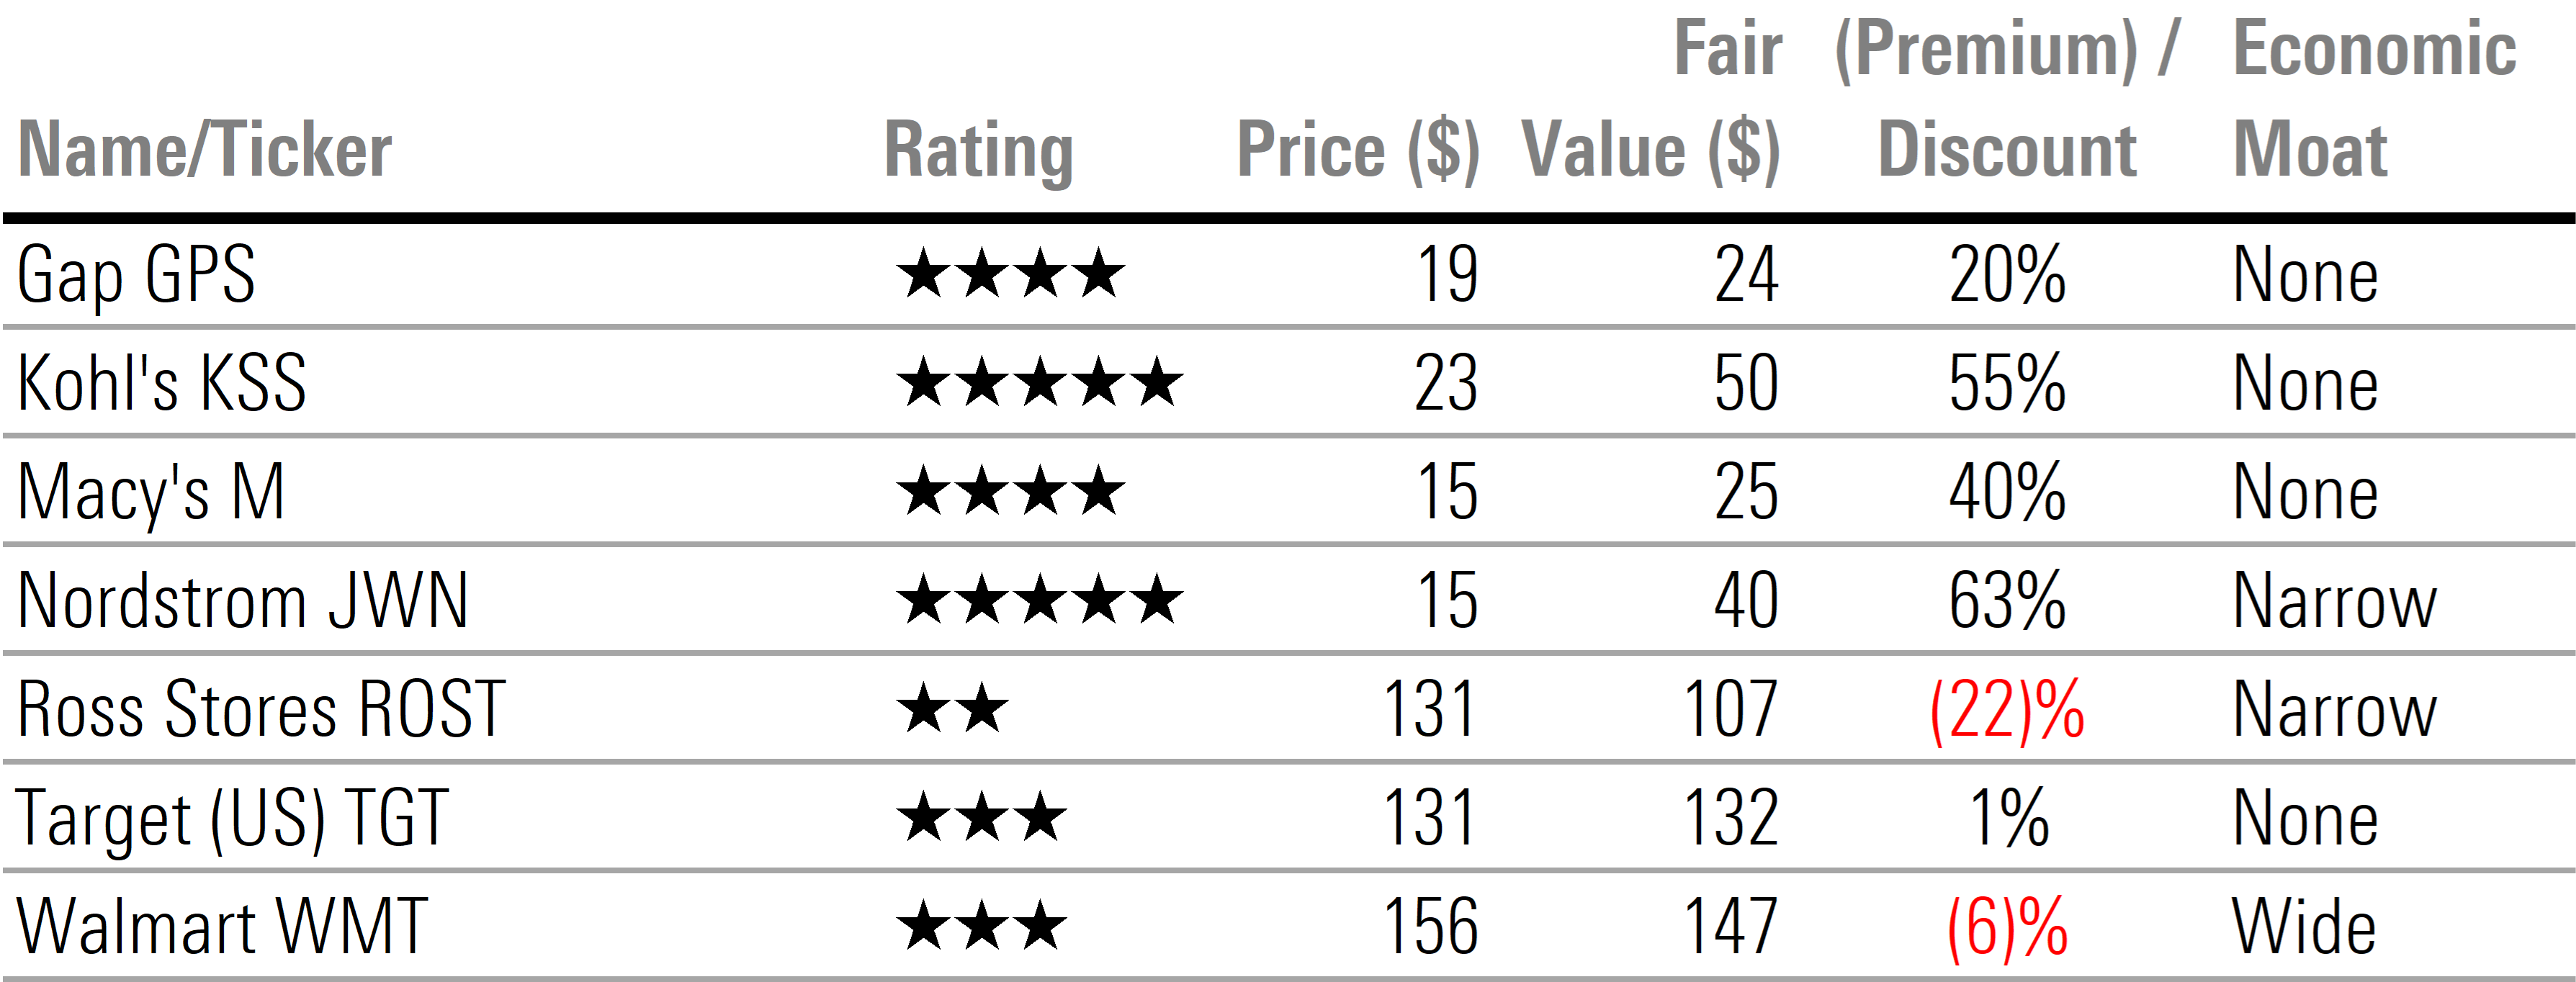 Table displaying star rating, price, fair value, premium or discount, and economic moat rating for stocks under Morningstar coverage in the retail sector.